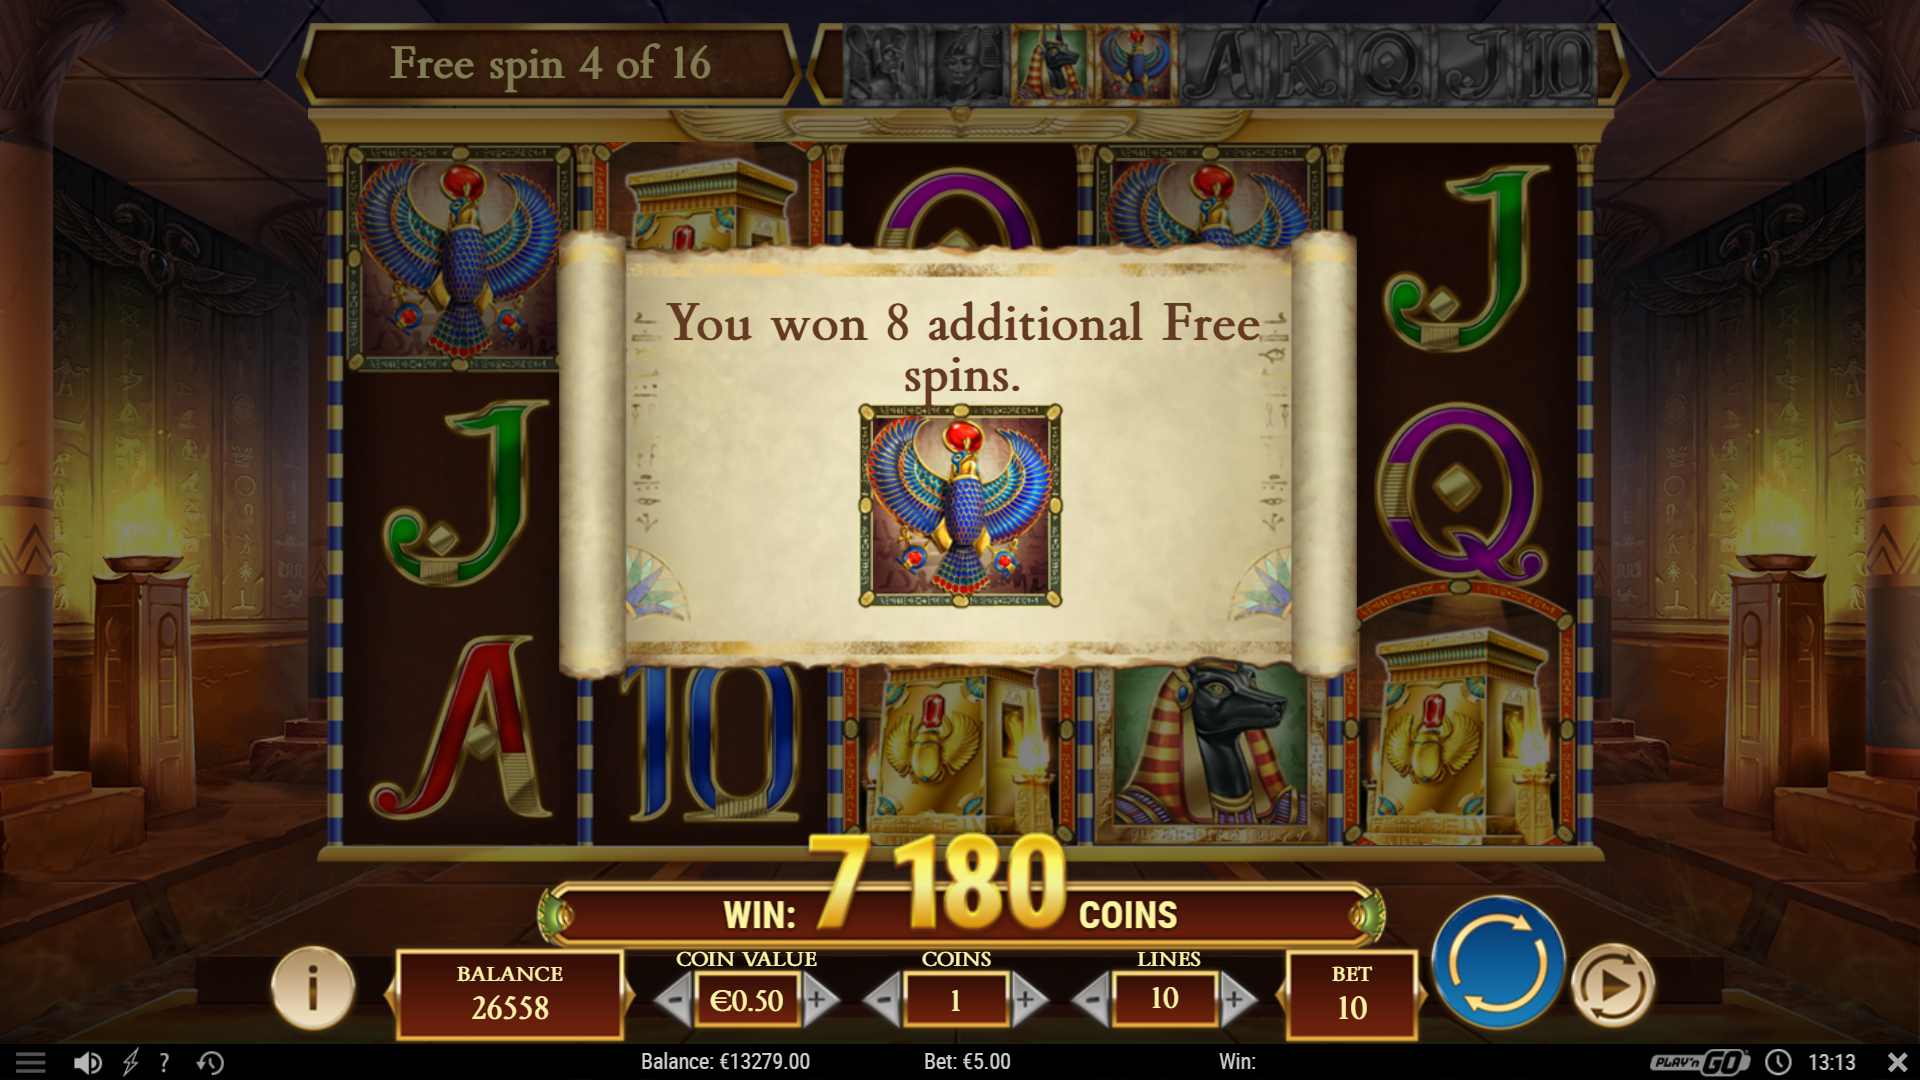 Legacy of Dead Slot free spins